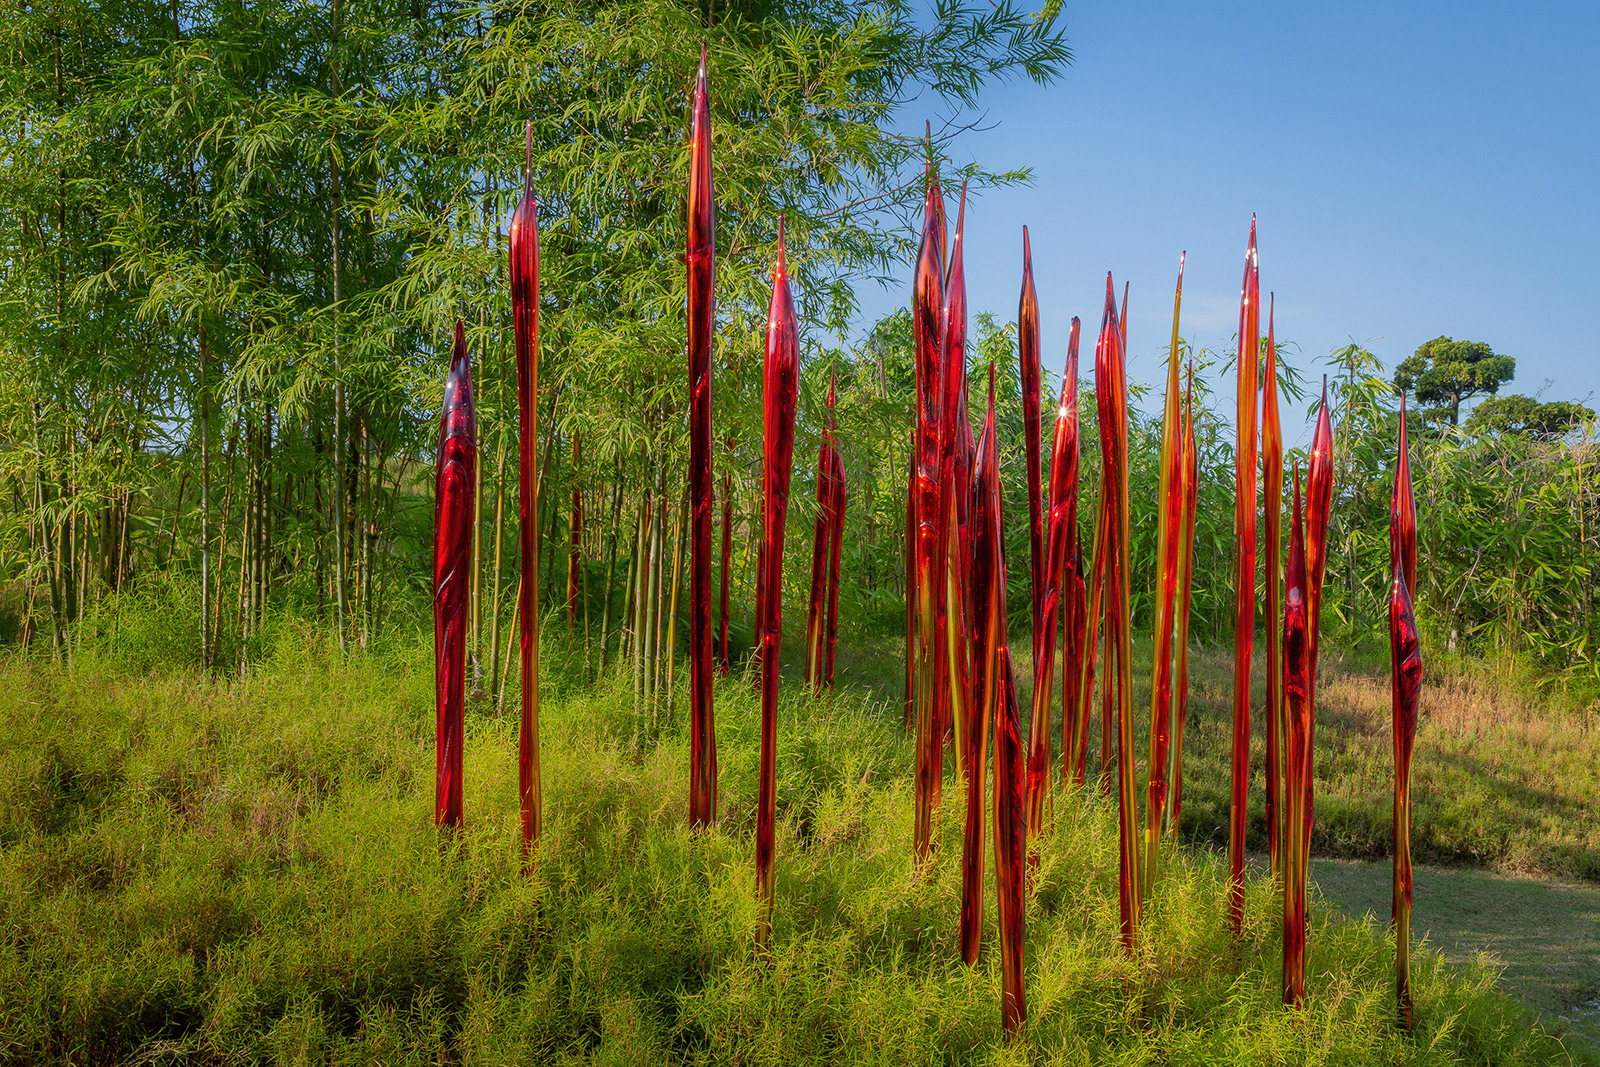 Dale Chihuly, Red Bamboo Reeds, 2020